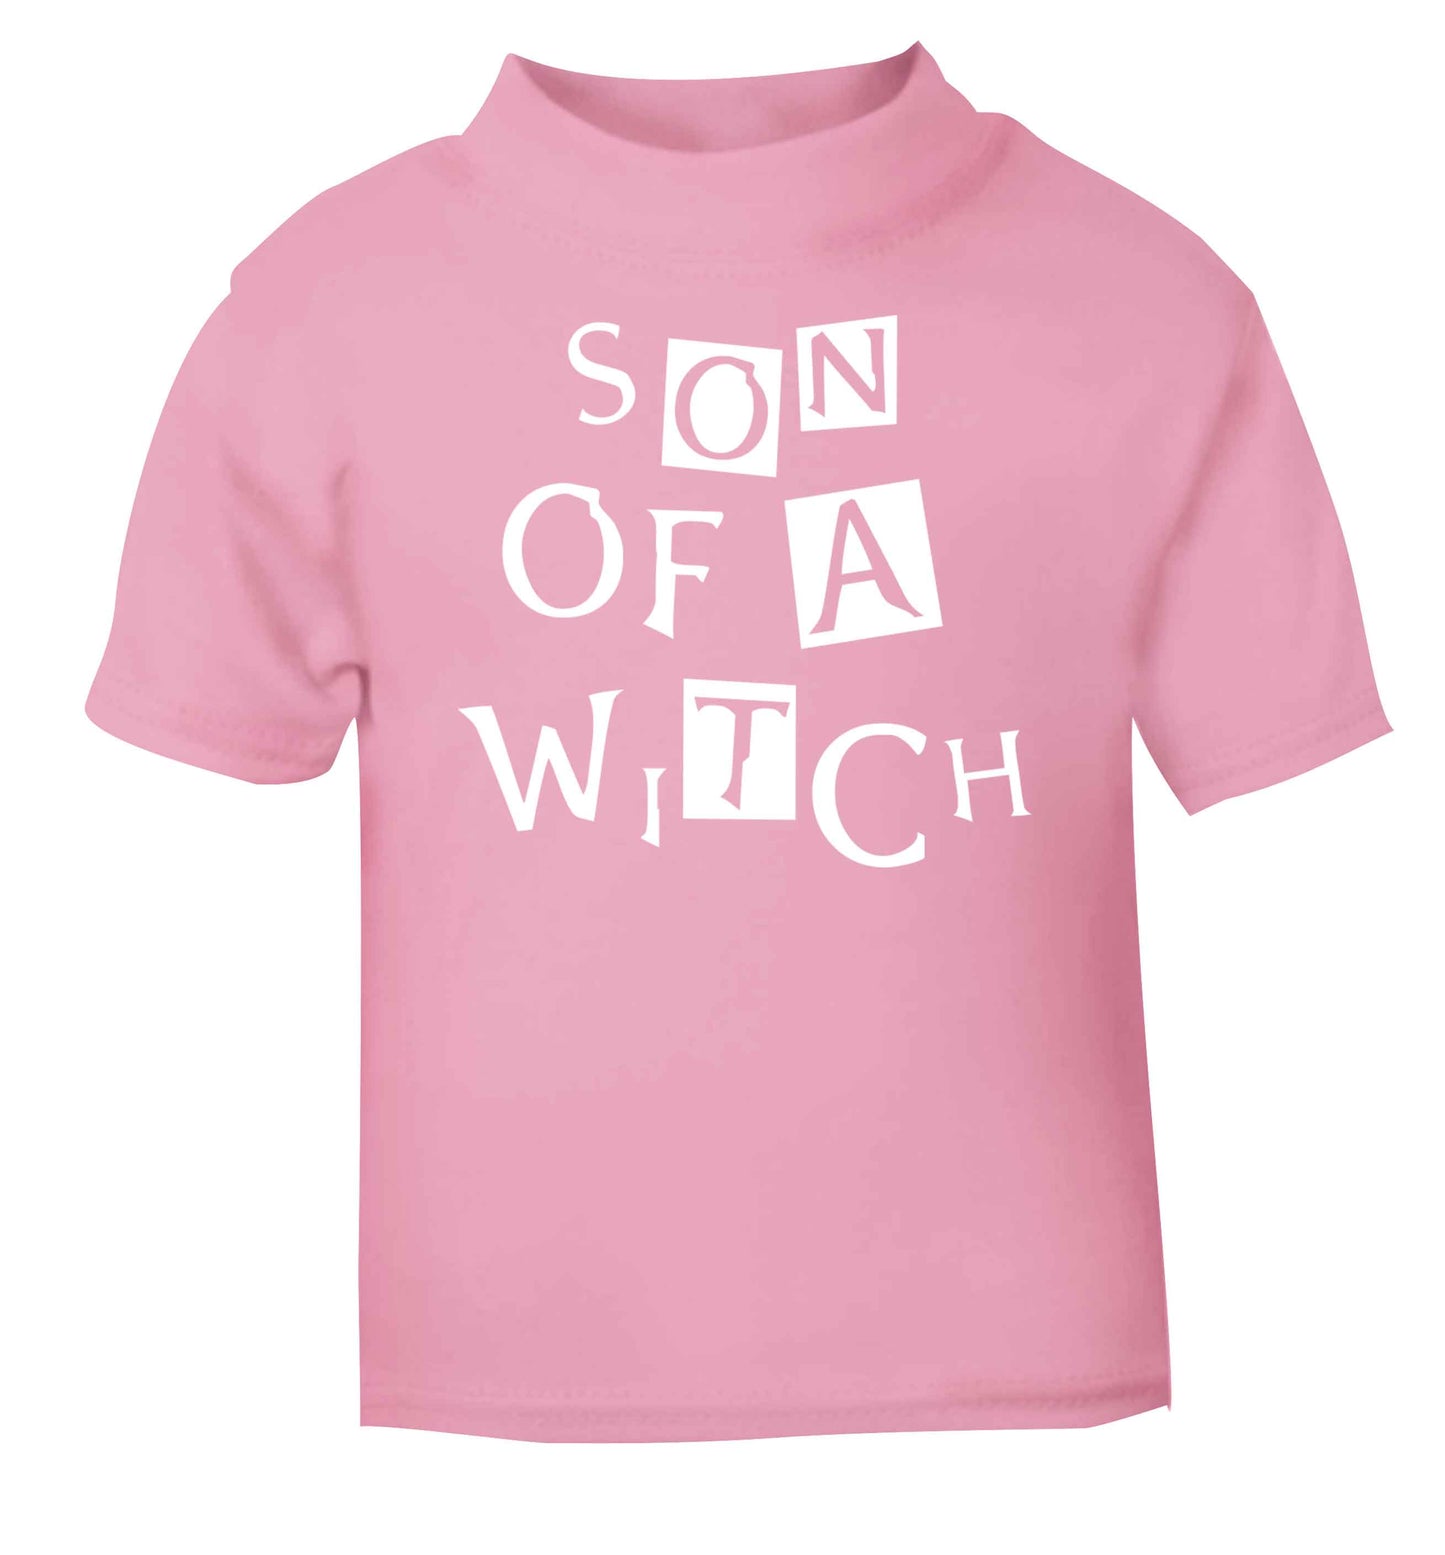 Son of a witch light pink baby toddler Tshirt 2 Years